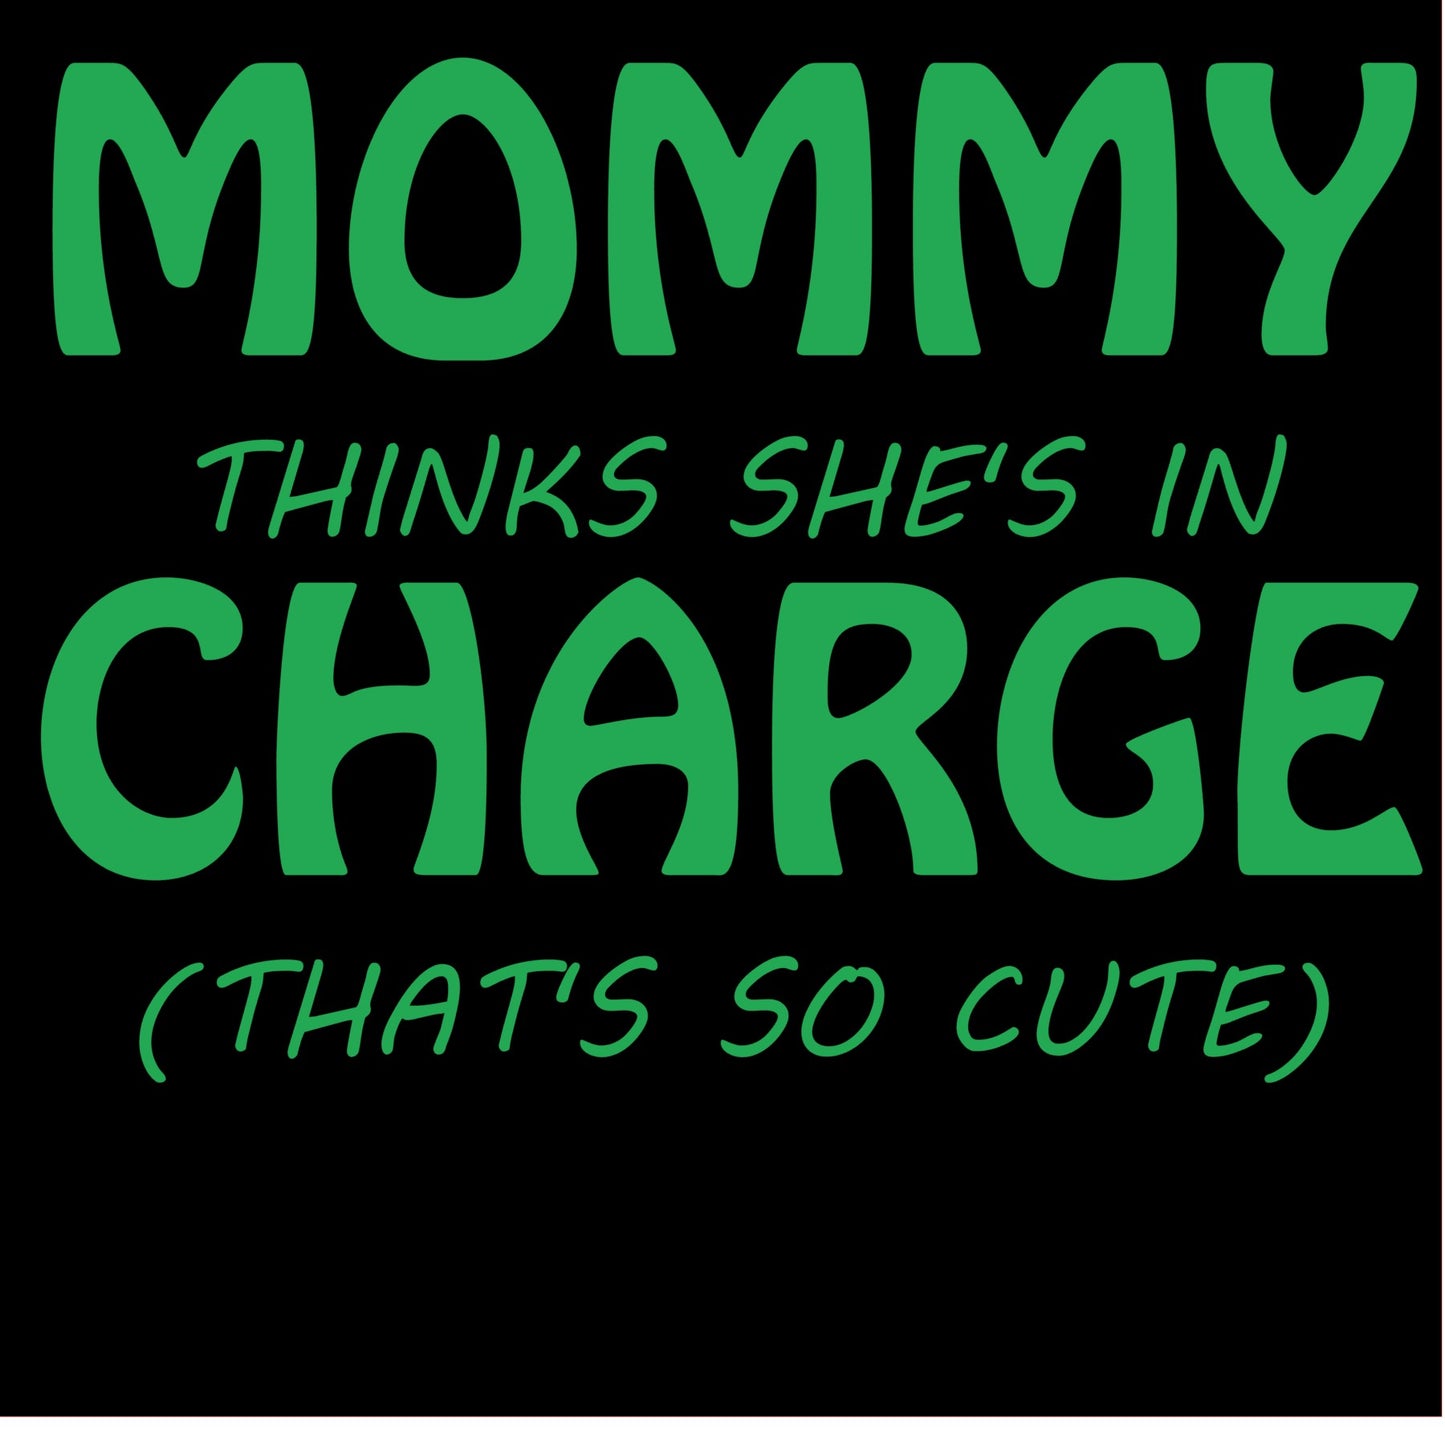 Mommy Thinks She's In Charge (That's So Cute)